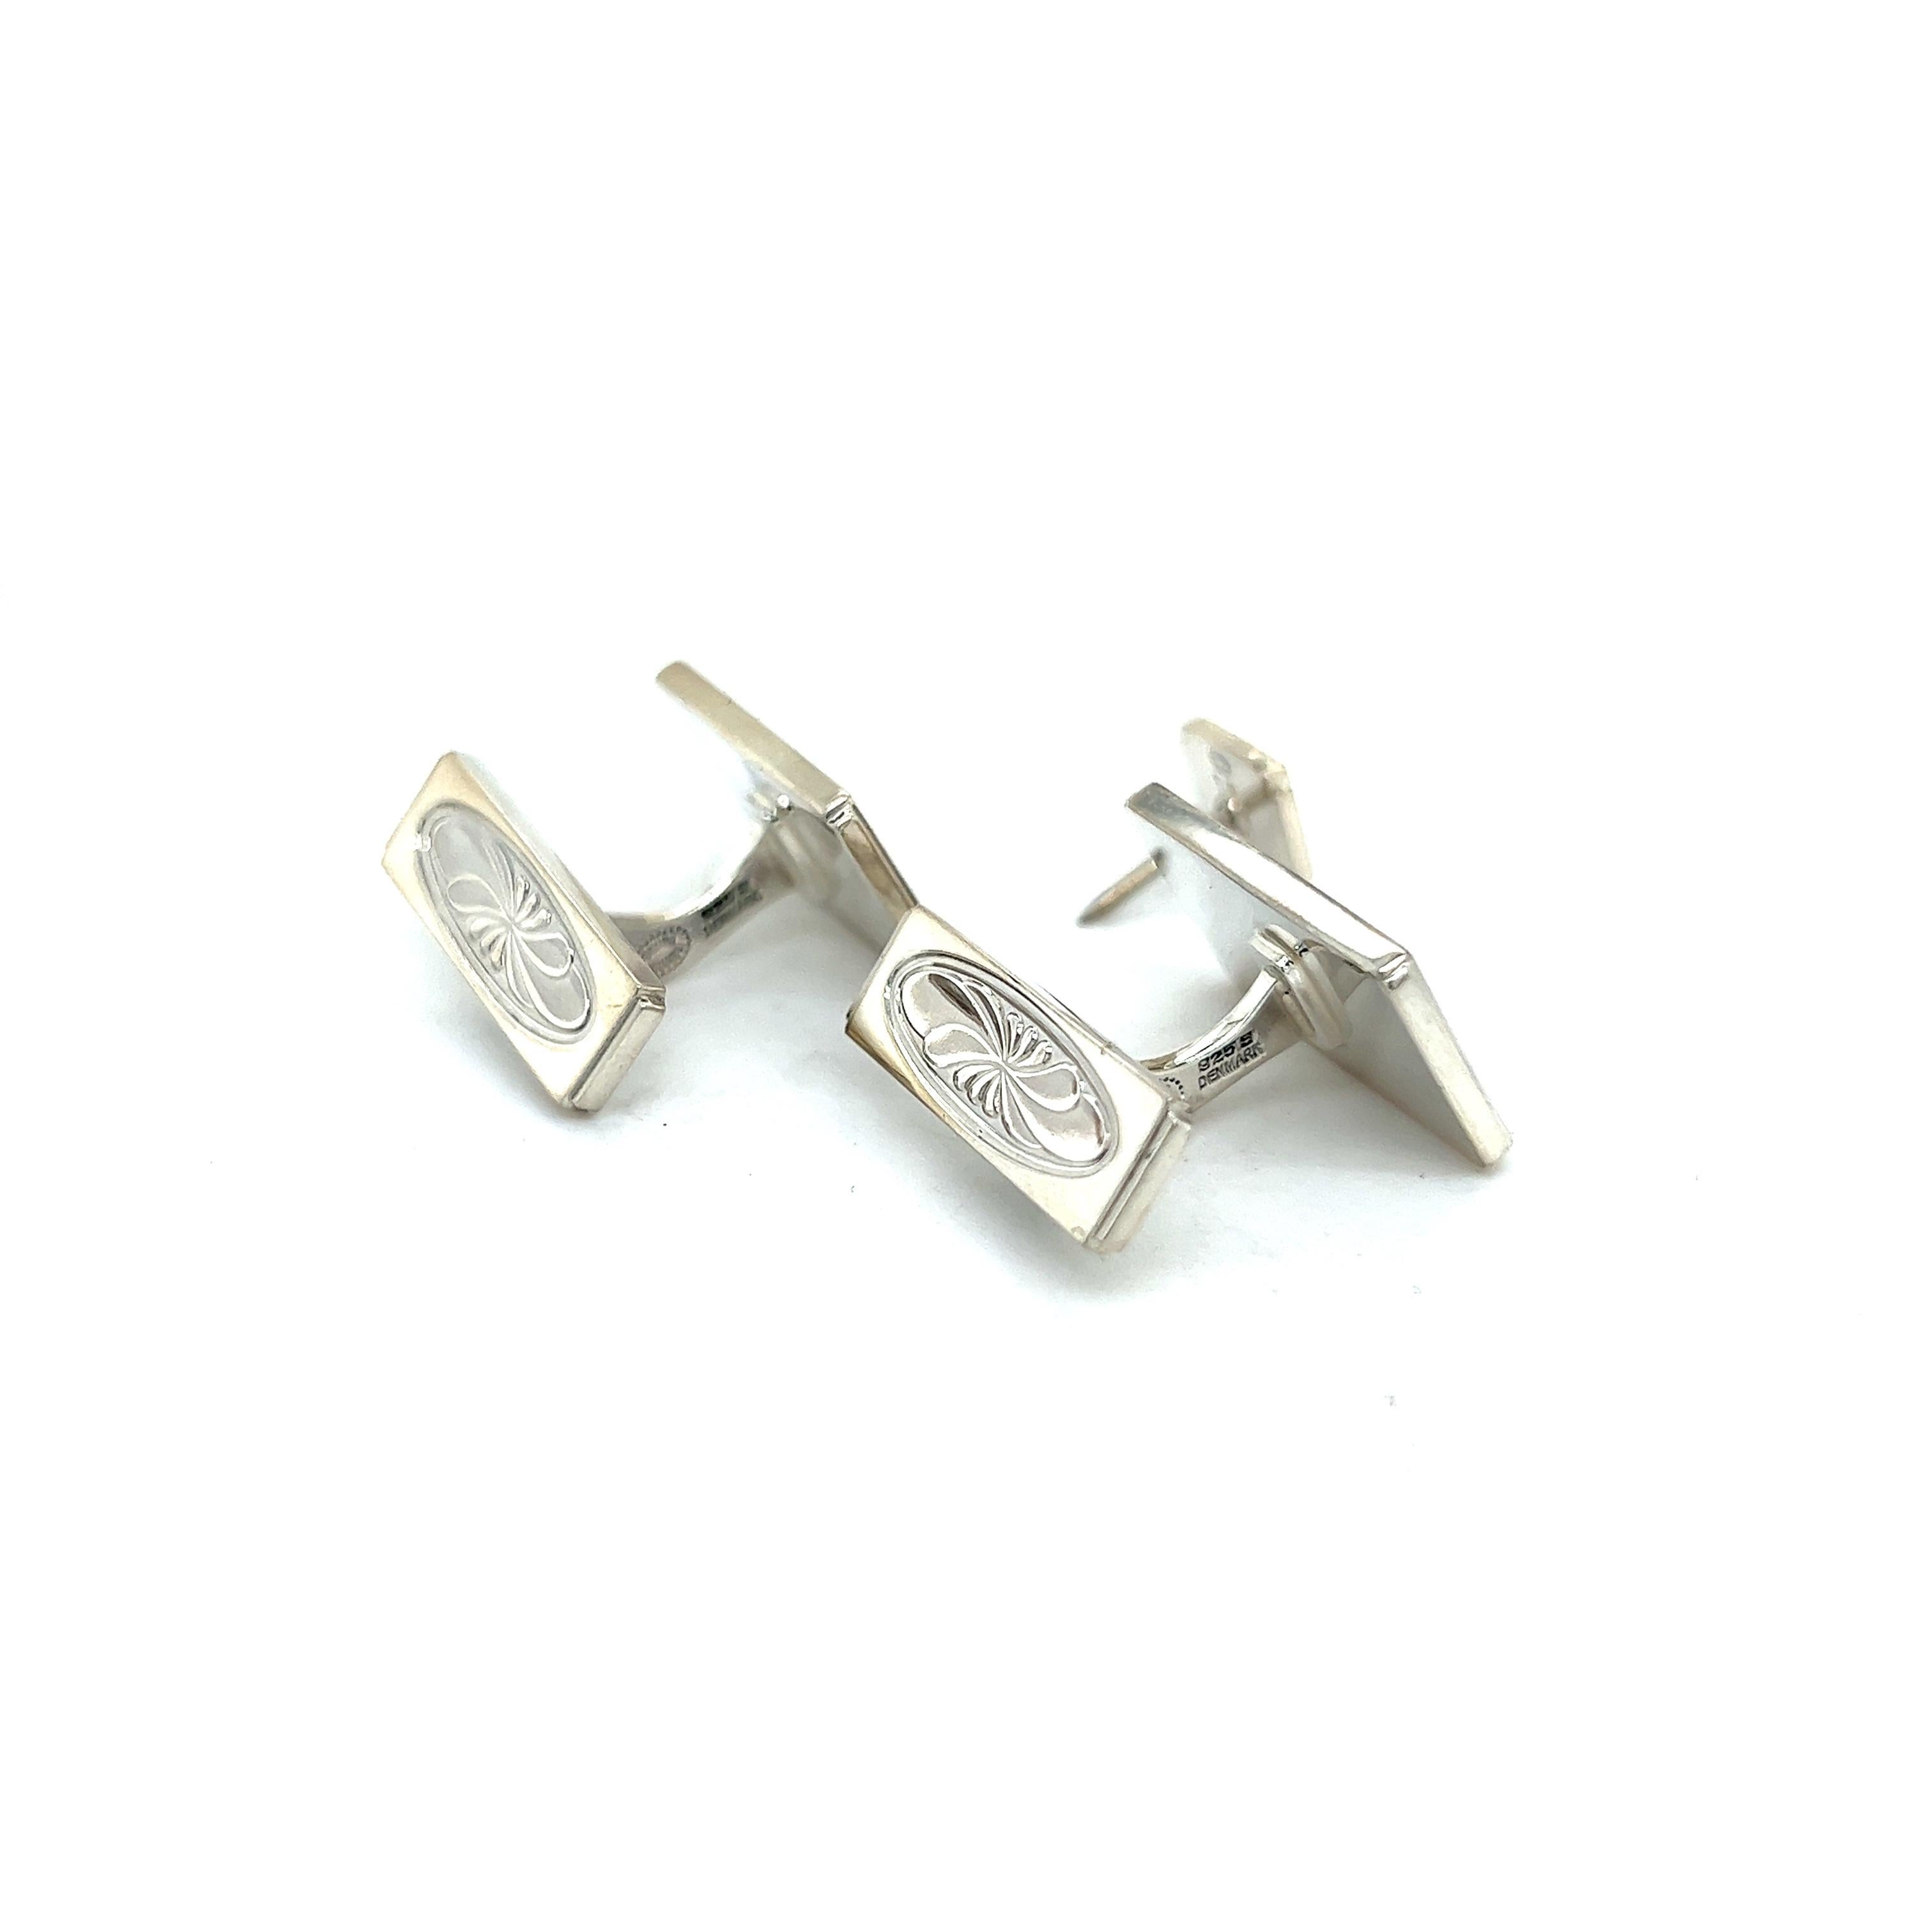 tie pin and cufflinks